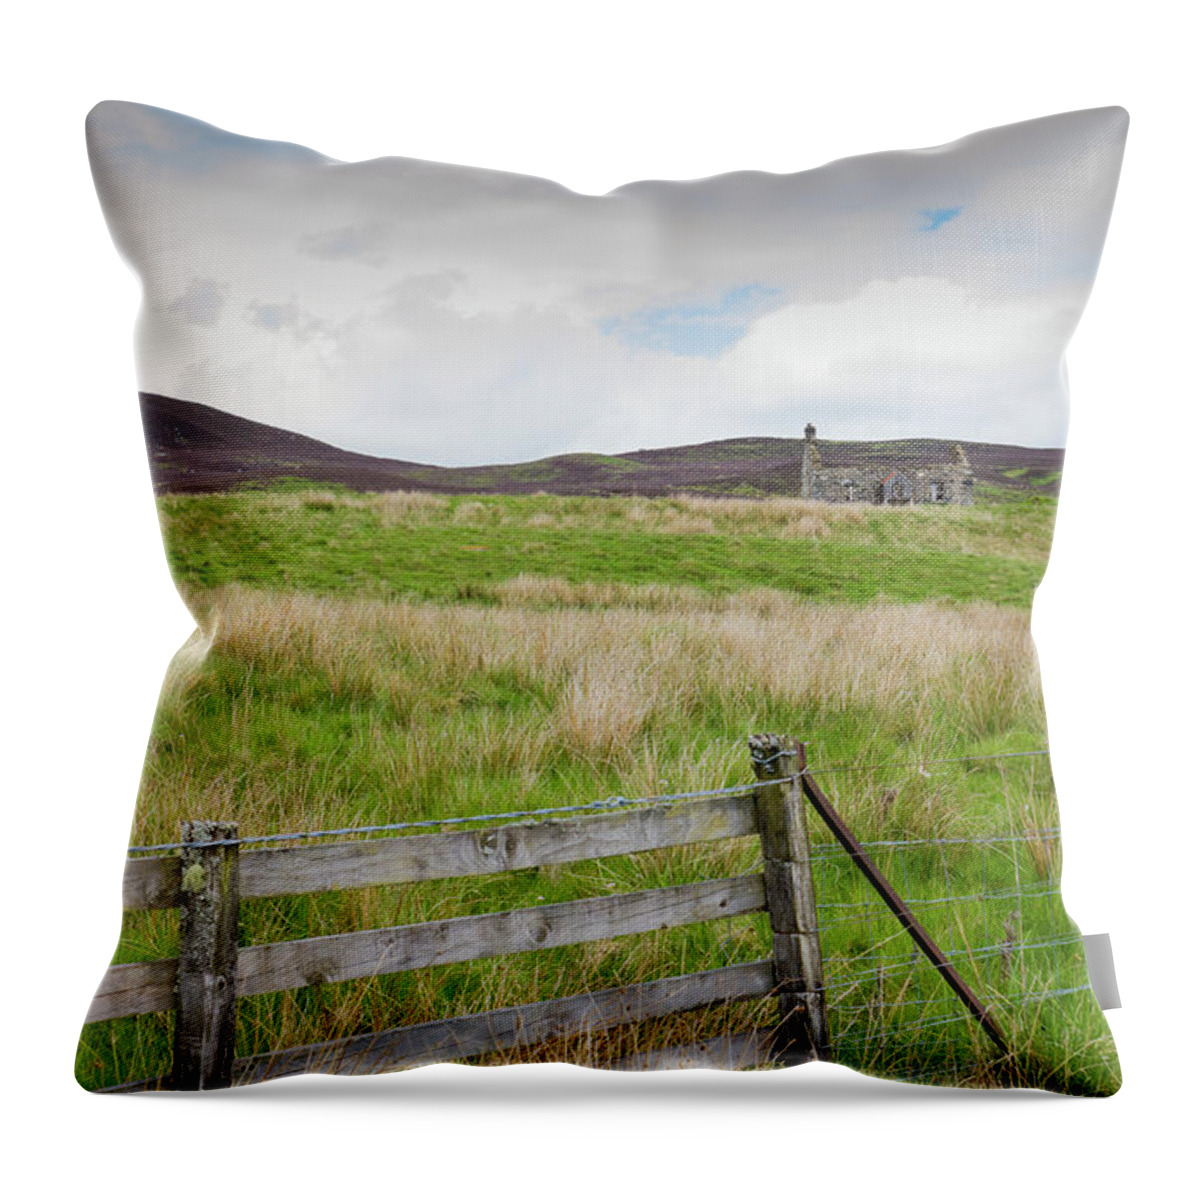 Scotland Throw Pillow featuring the photograph Perthshire Scotland Rural Landscape 1 by Tanya C Smith